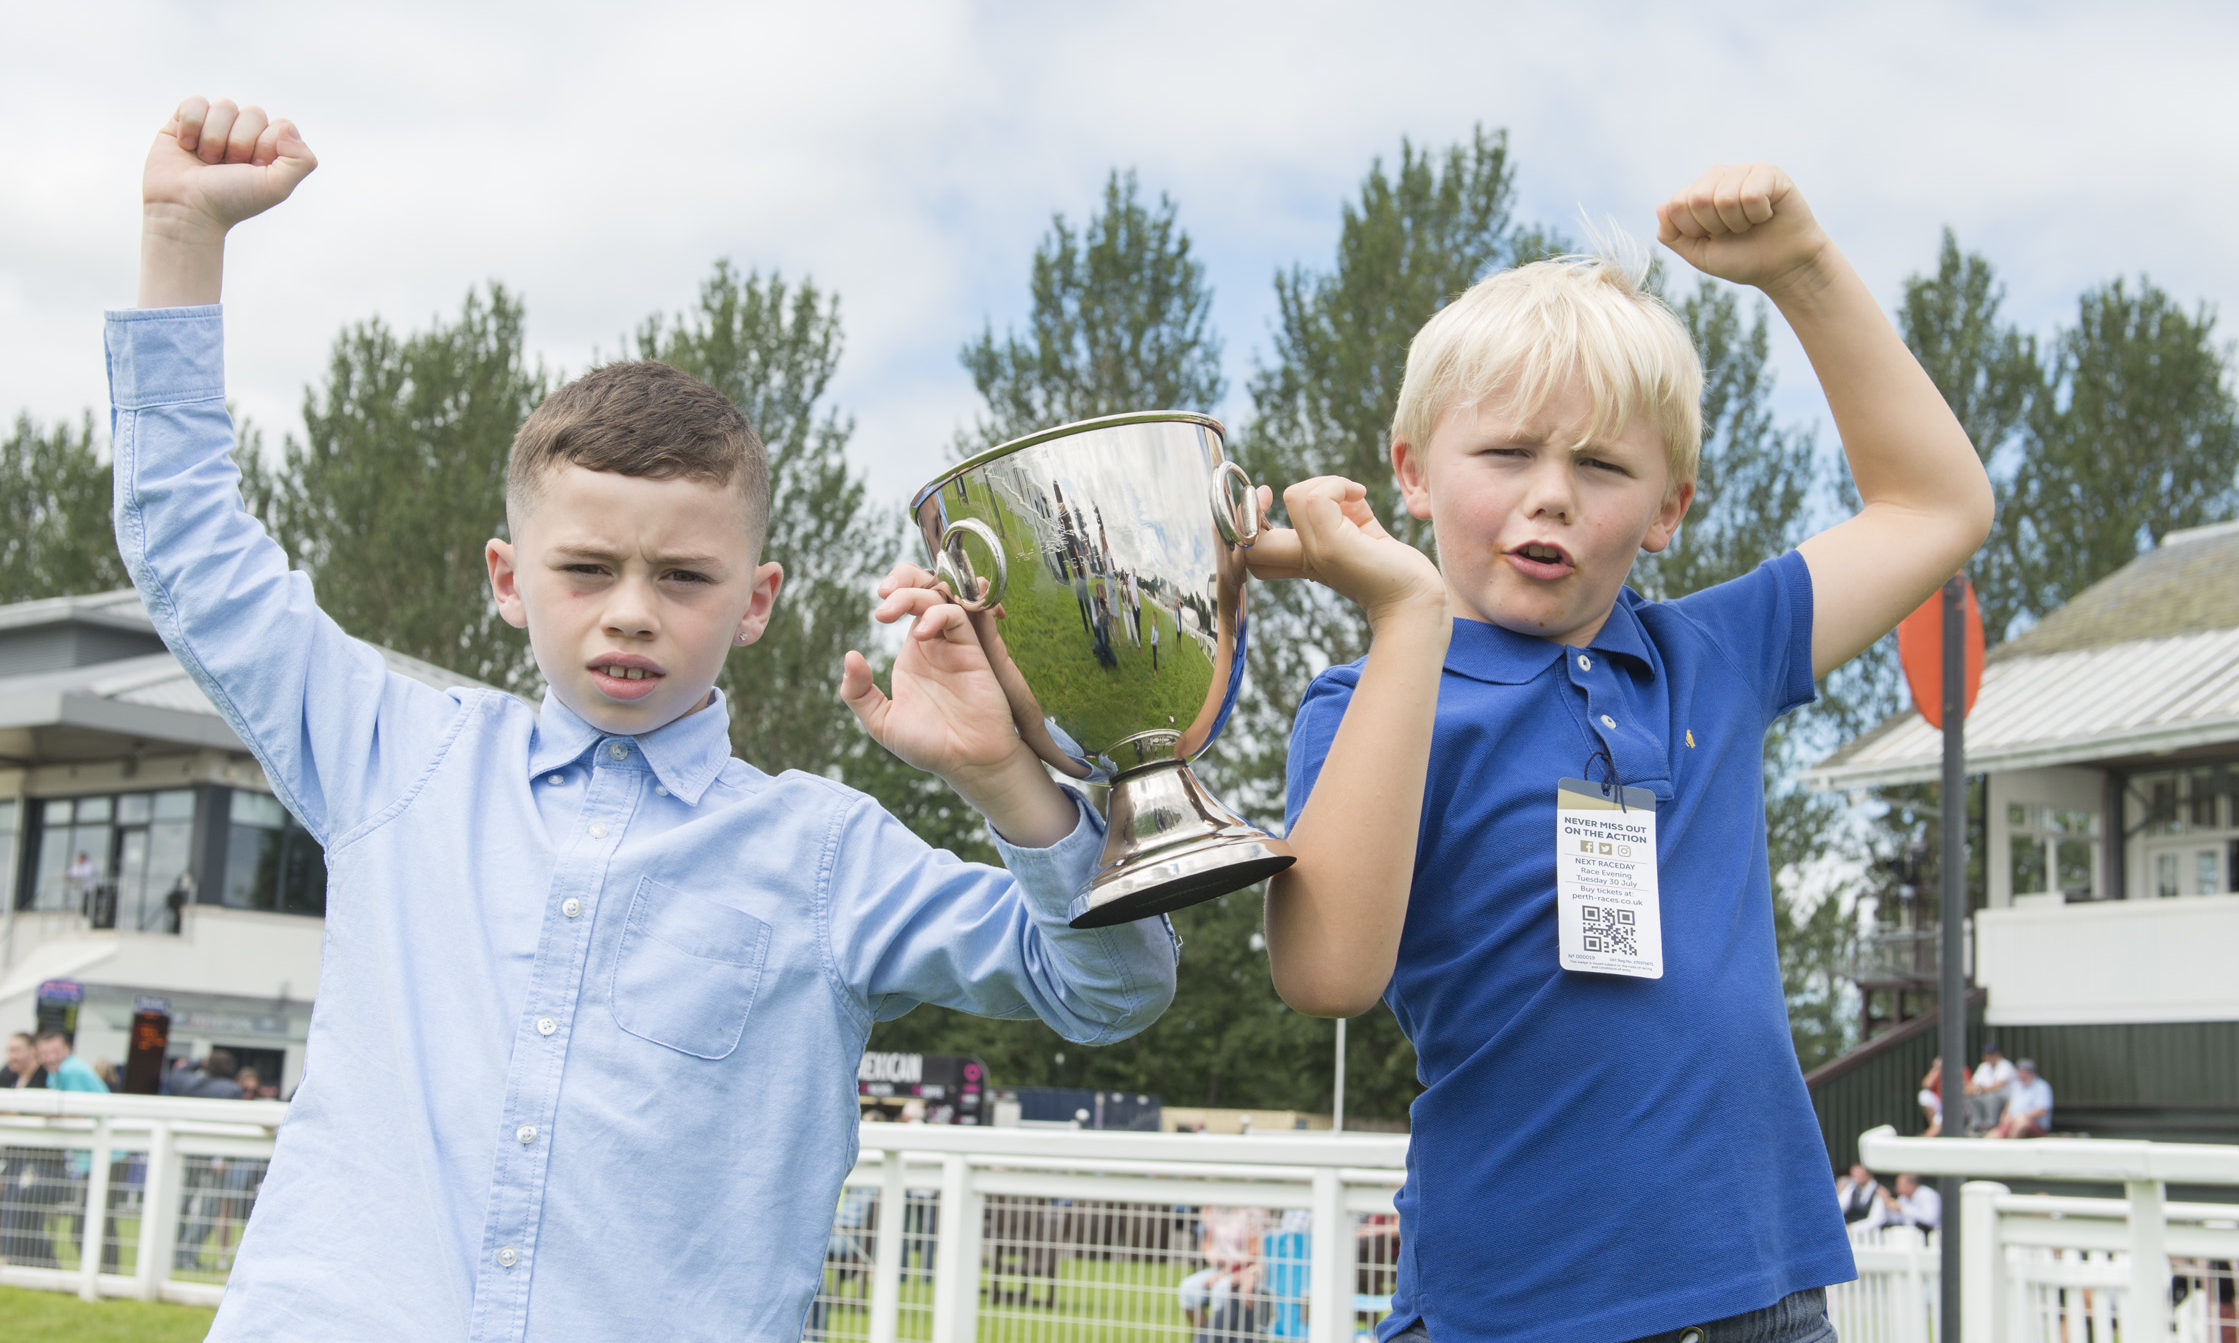 Joint winners of one of the races; Kaii Wann (9) and Henry Alexander (8).